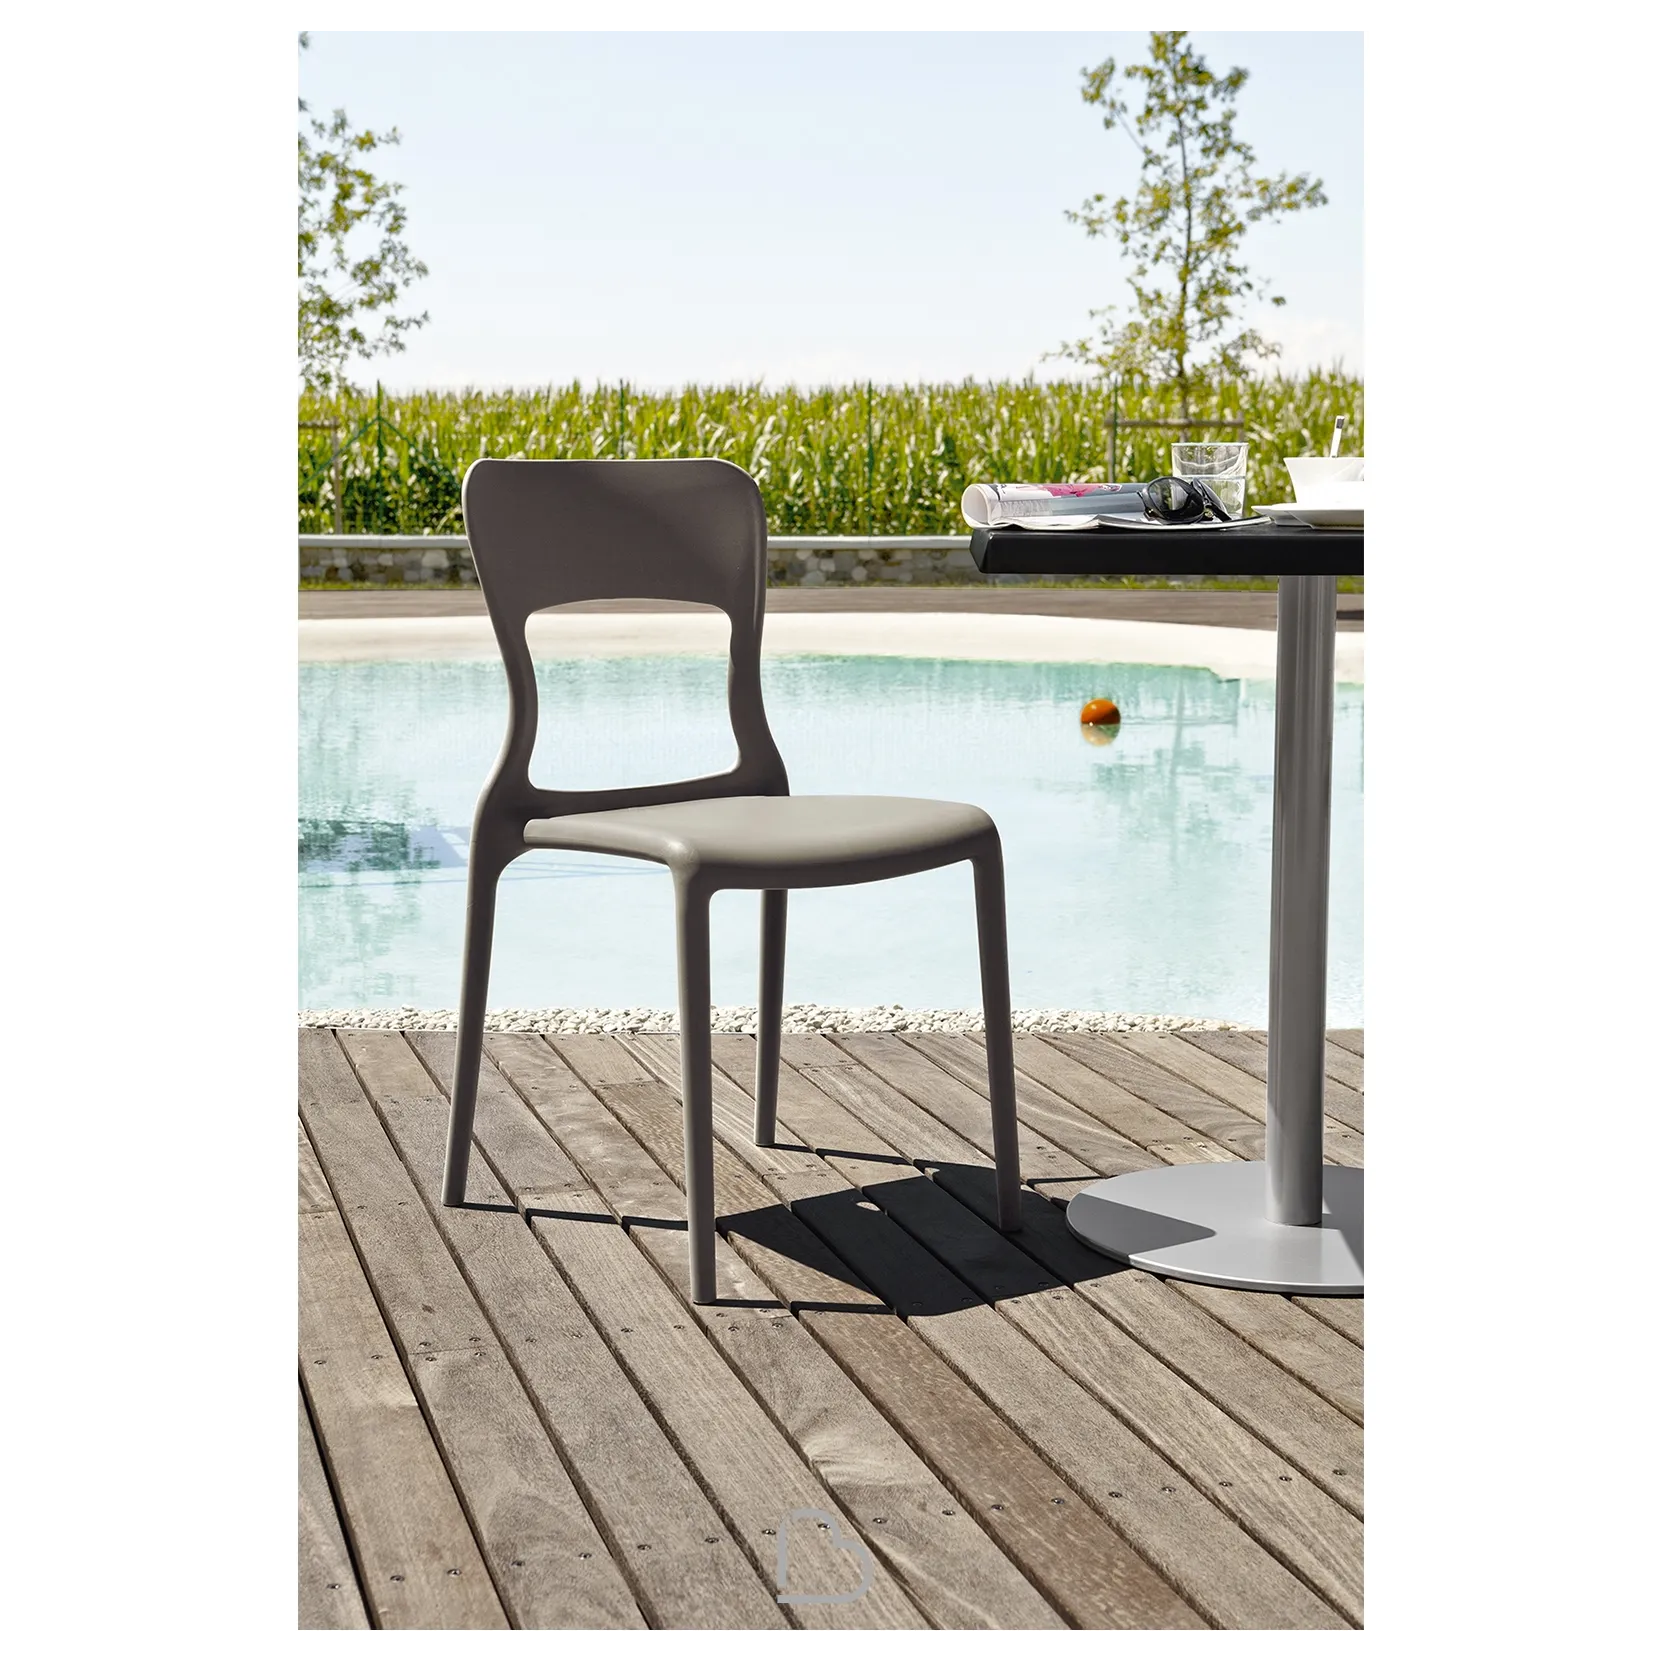 Chair Connubia Helios Cb 1312 Barthome, Calligaris Outdoor Furniture